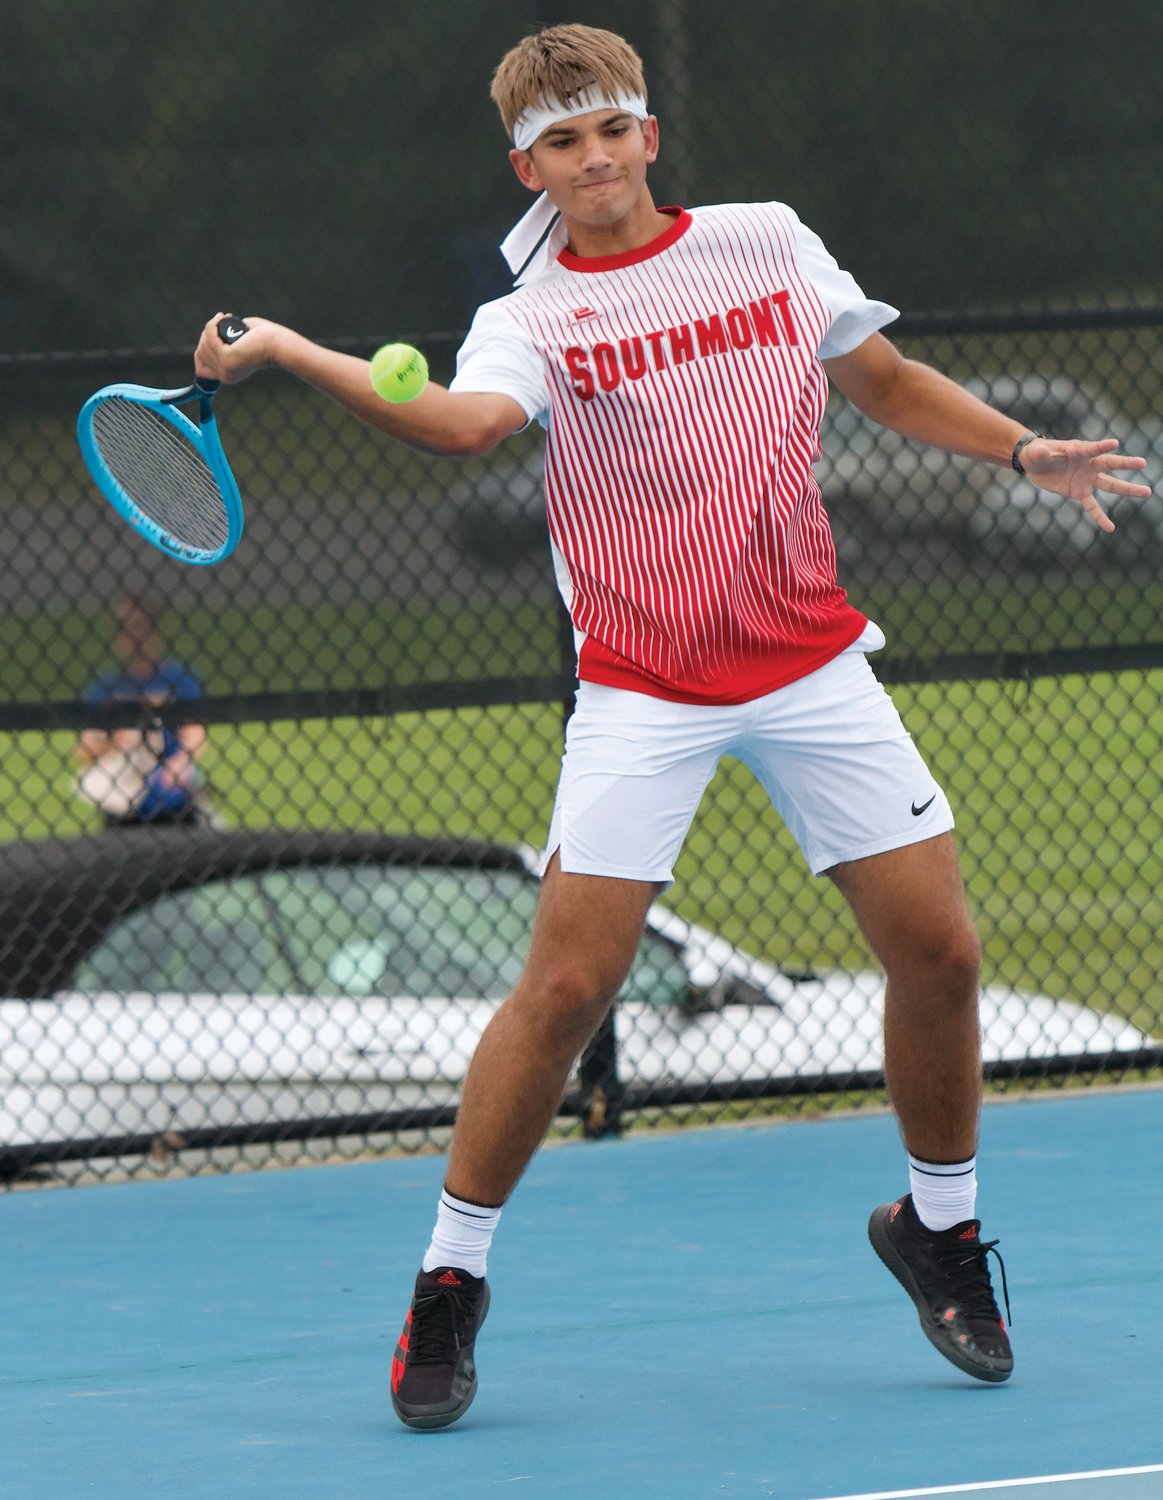 Southmont's Adam Cox picked up a 6-0, 6-0 win at No. 1 singles on Thursday.